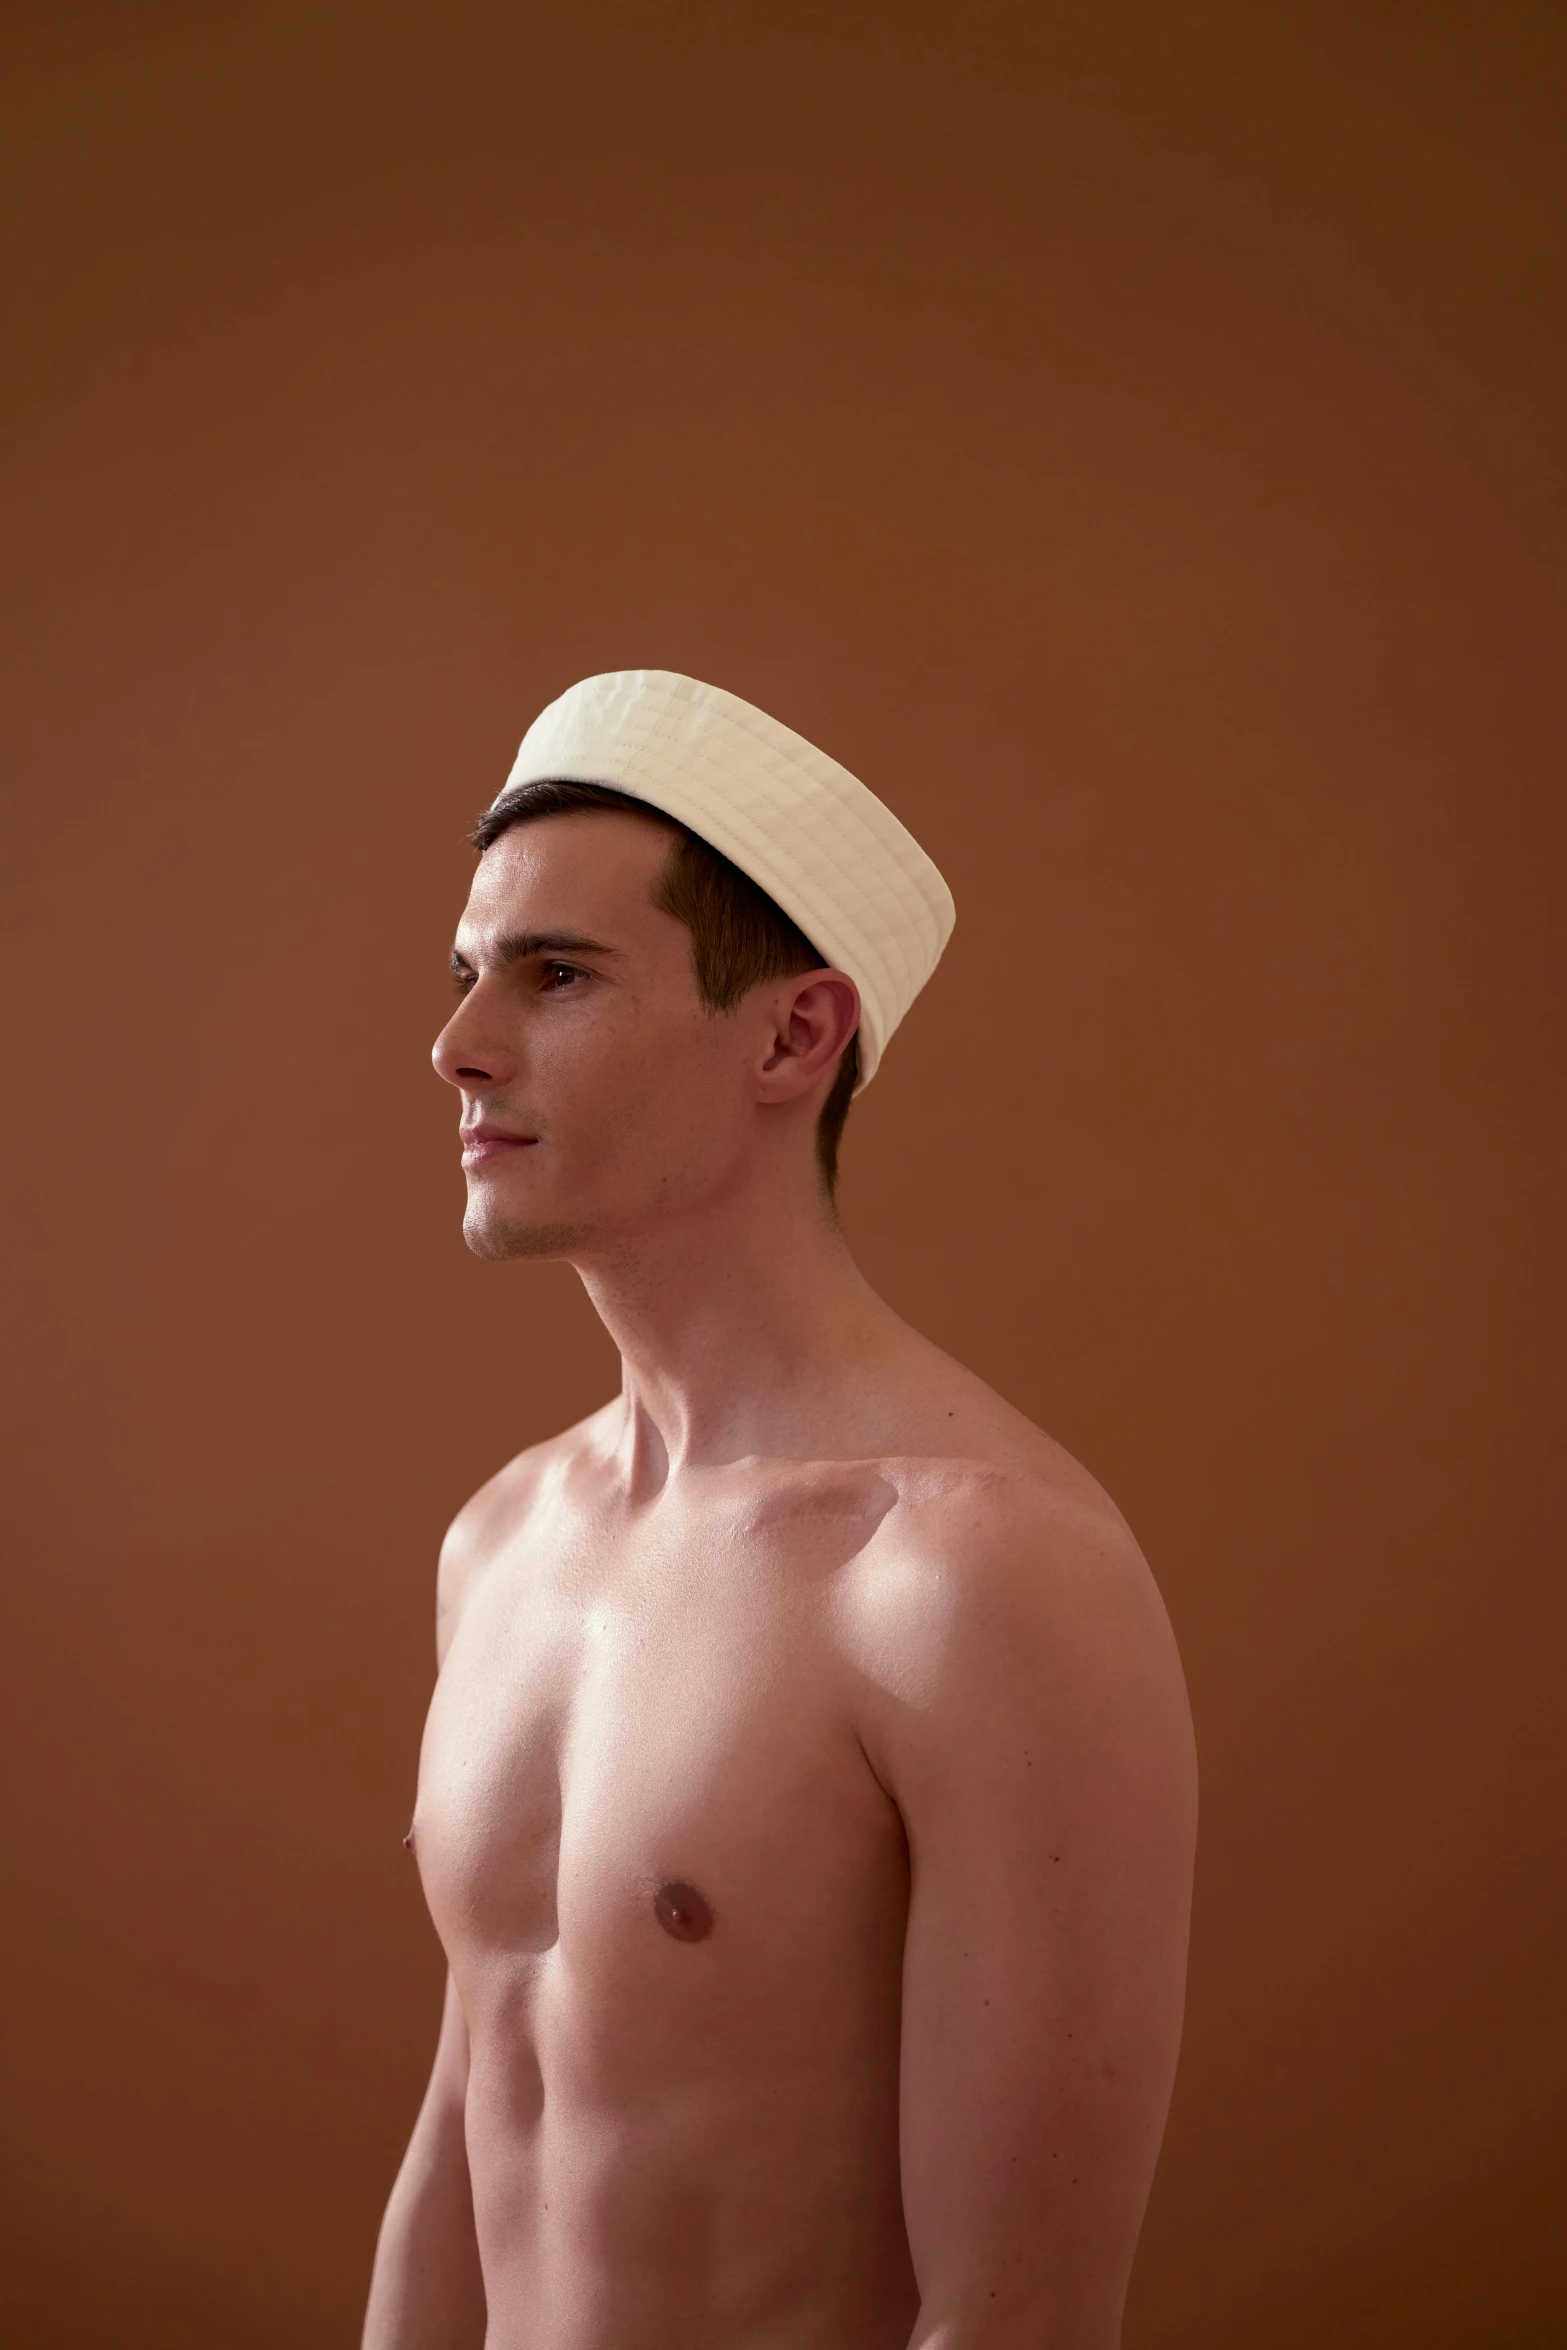 a shirtless man standing in front of a brown wall, by Nathalie Rattner, conceptual art, wearing a white bathing cap, beautiful androgynous prince, photographed for reuters, muslim